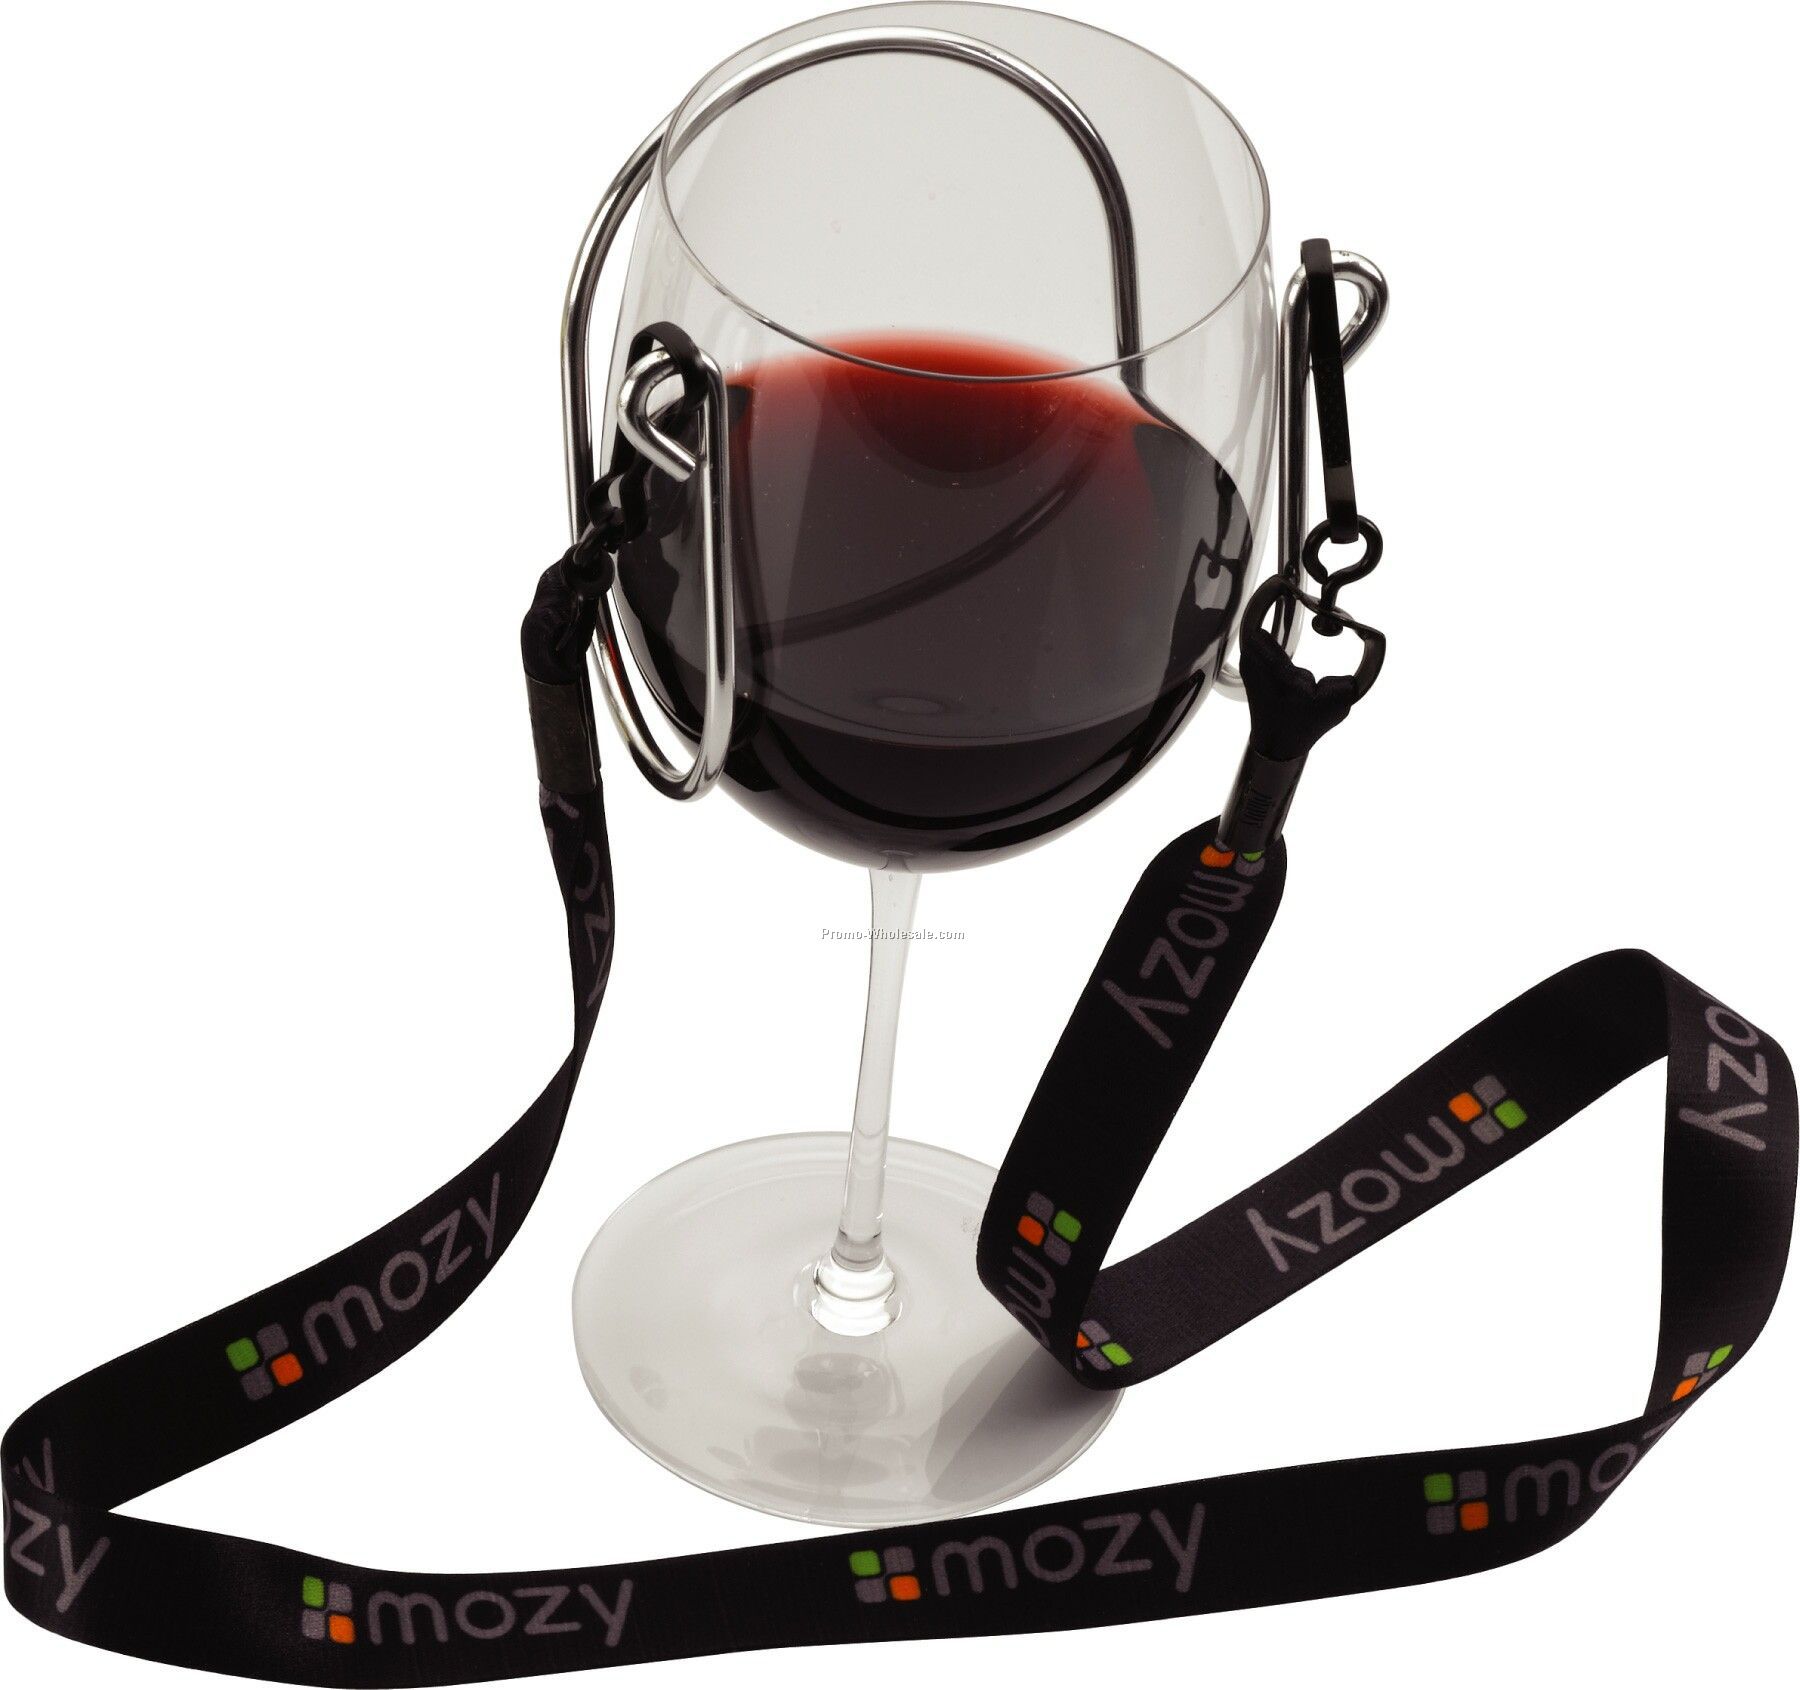 Wine Glass Holder Attachment - Small Or Large